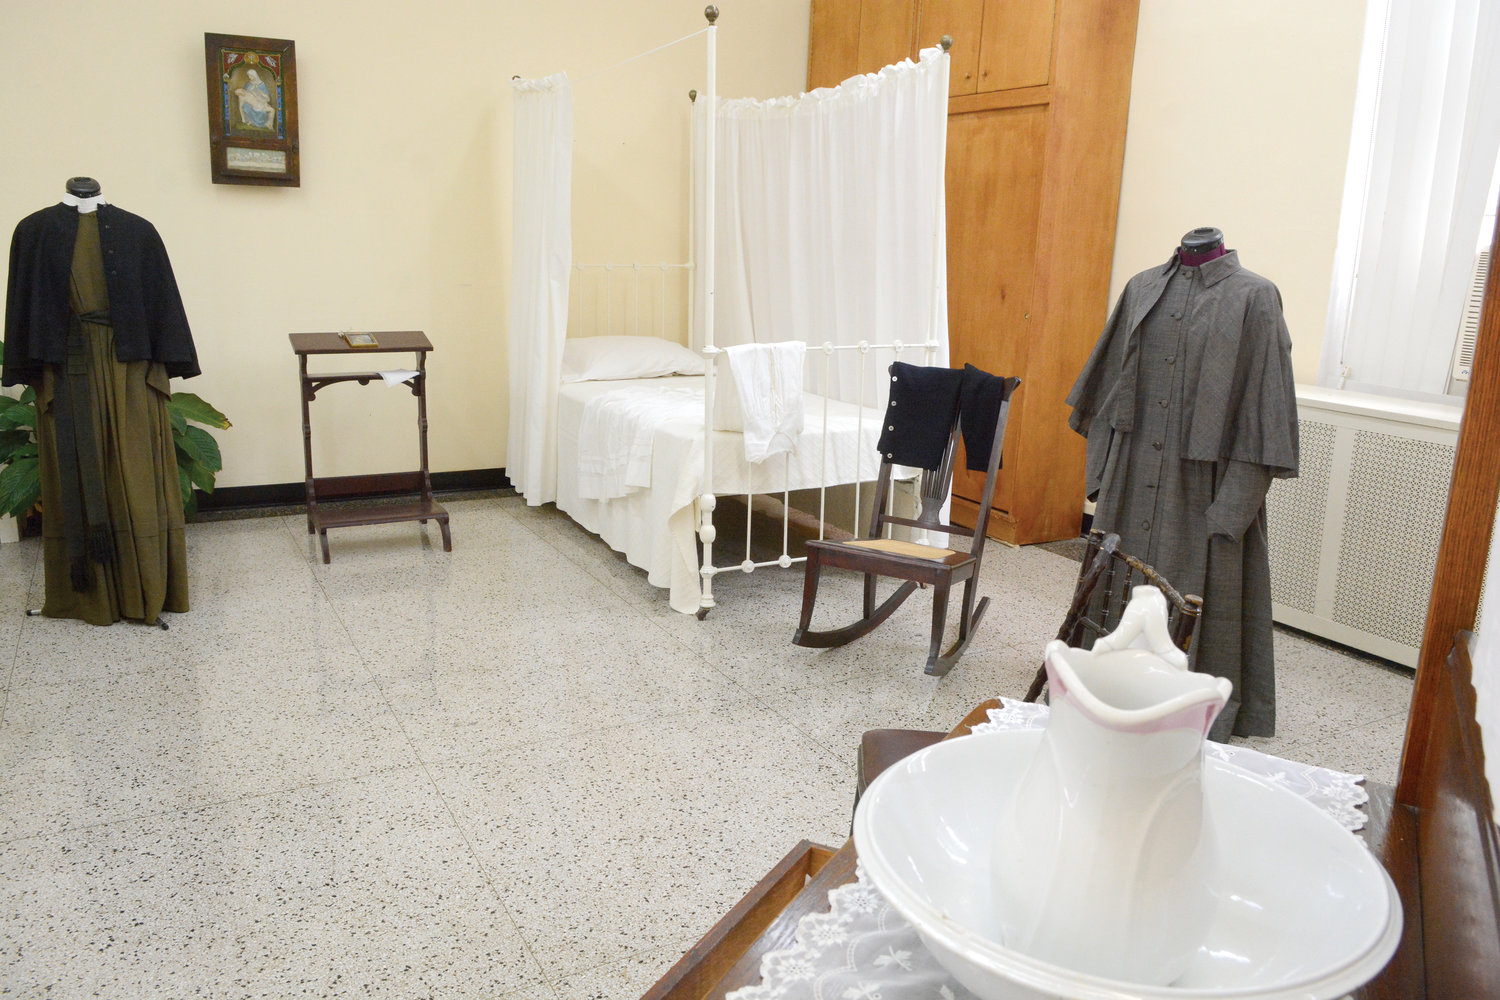 Two exhibits at the St. Frances Xavier Cabrini Shrine in Washington Heights feature Mother Cabrini’s personal clothing and items. The exhibits, which opened July 7, were created as a way to commemorate the 75th anniversary of the canonization of Mother Cabrini, which occurred July 7, 1946. They include Mother Cabrini’s bed and a New York Times story clipping about the canonization.